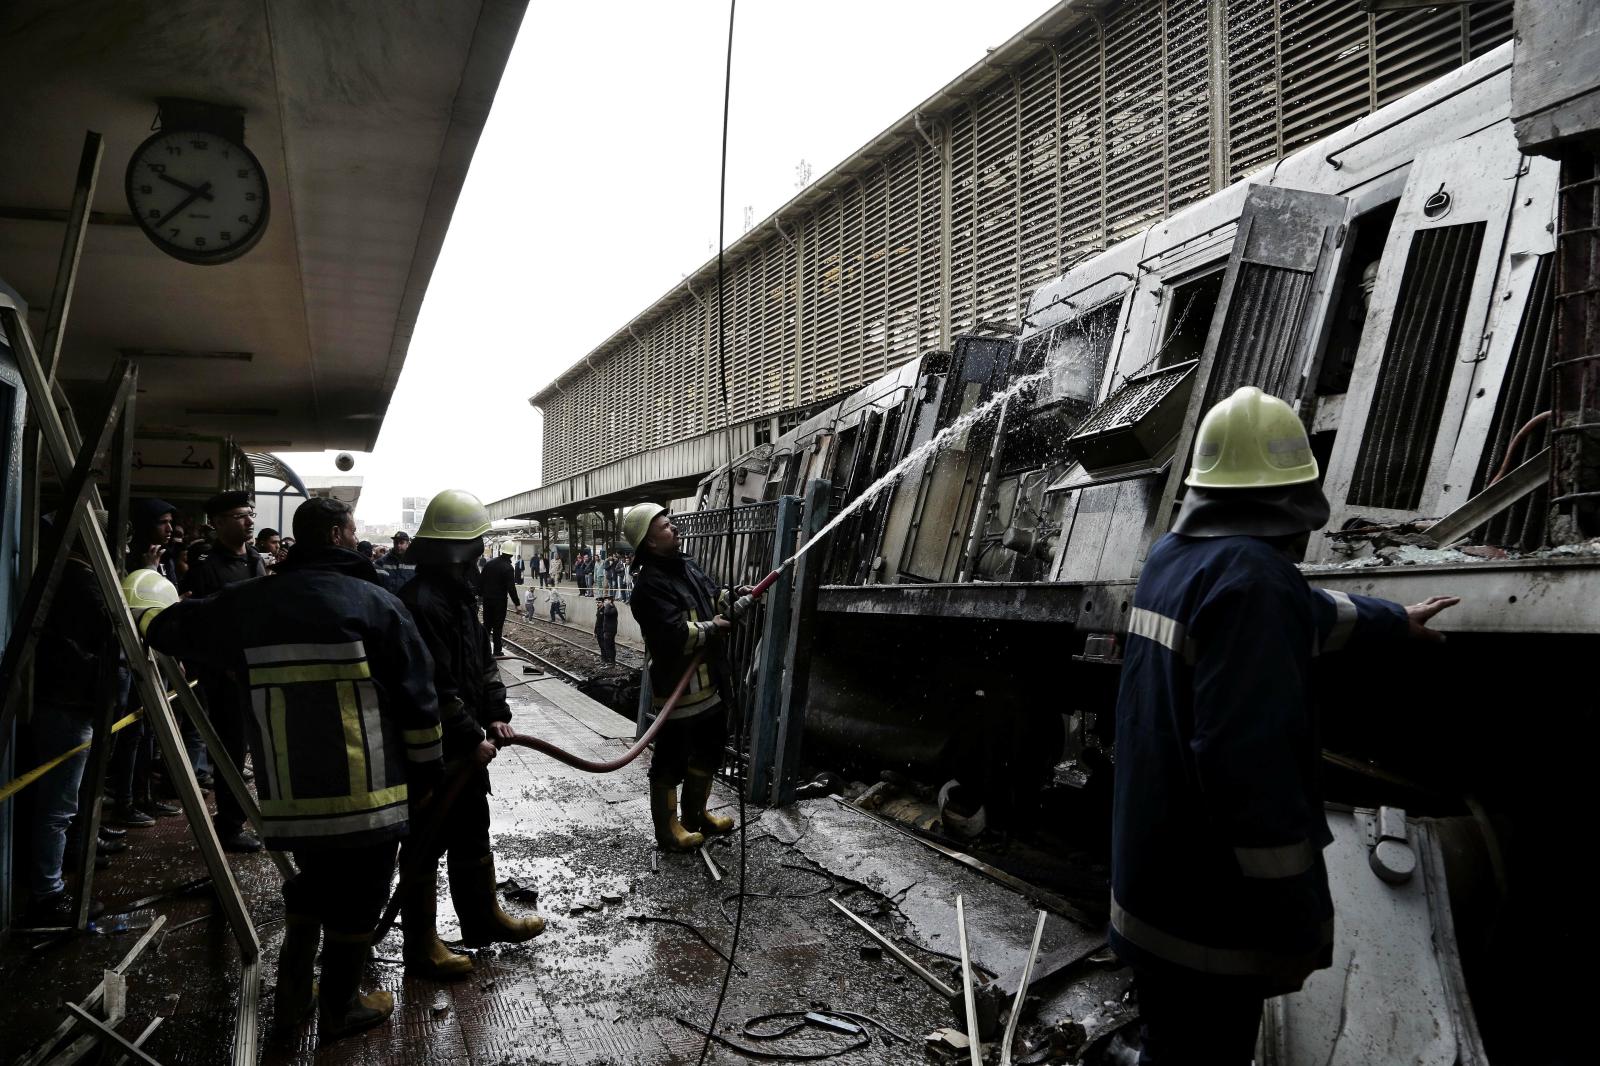  Firefighters hose down a train...Ramsis train station in Cairo. 